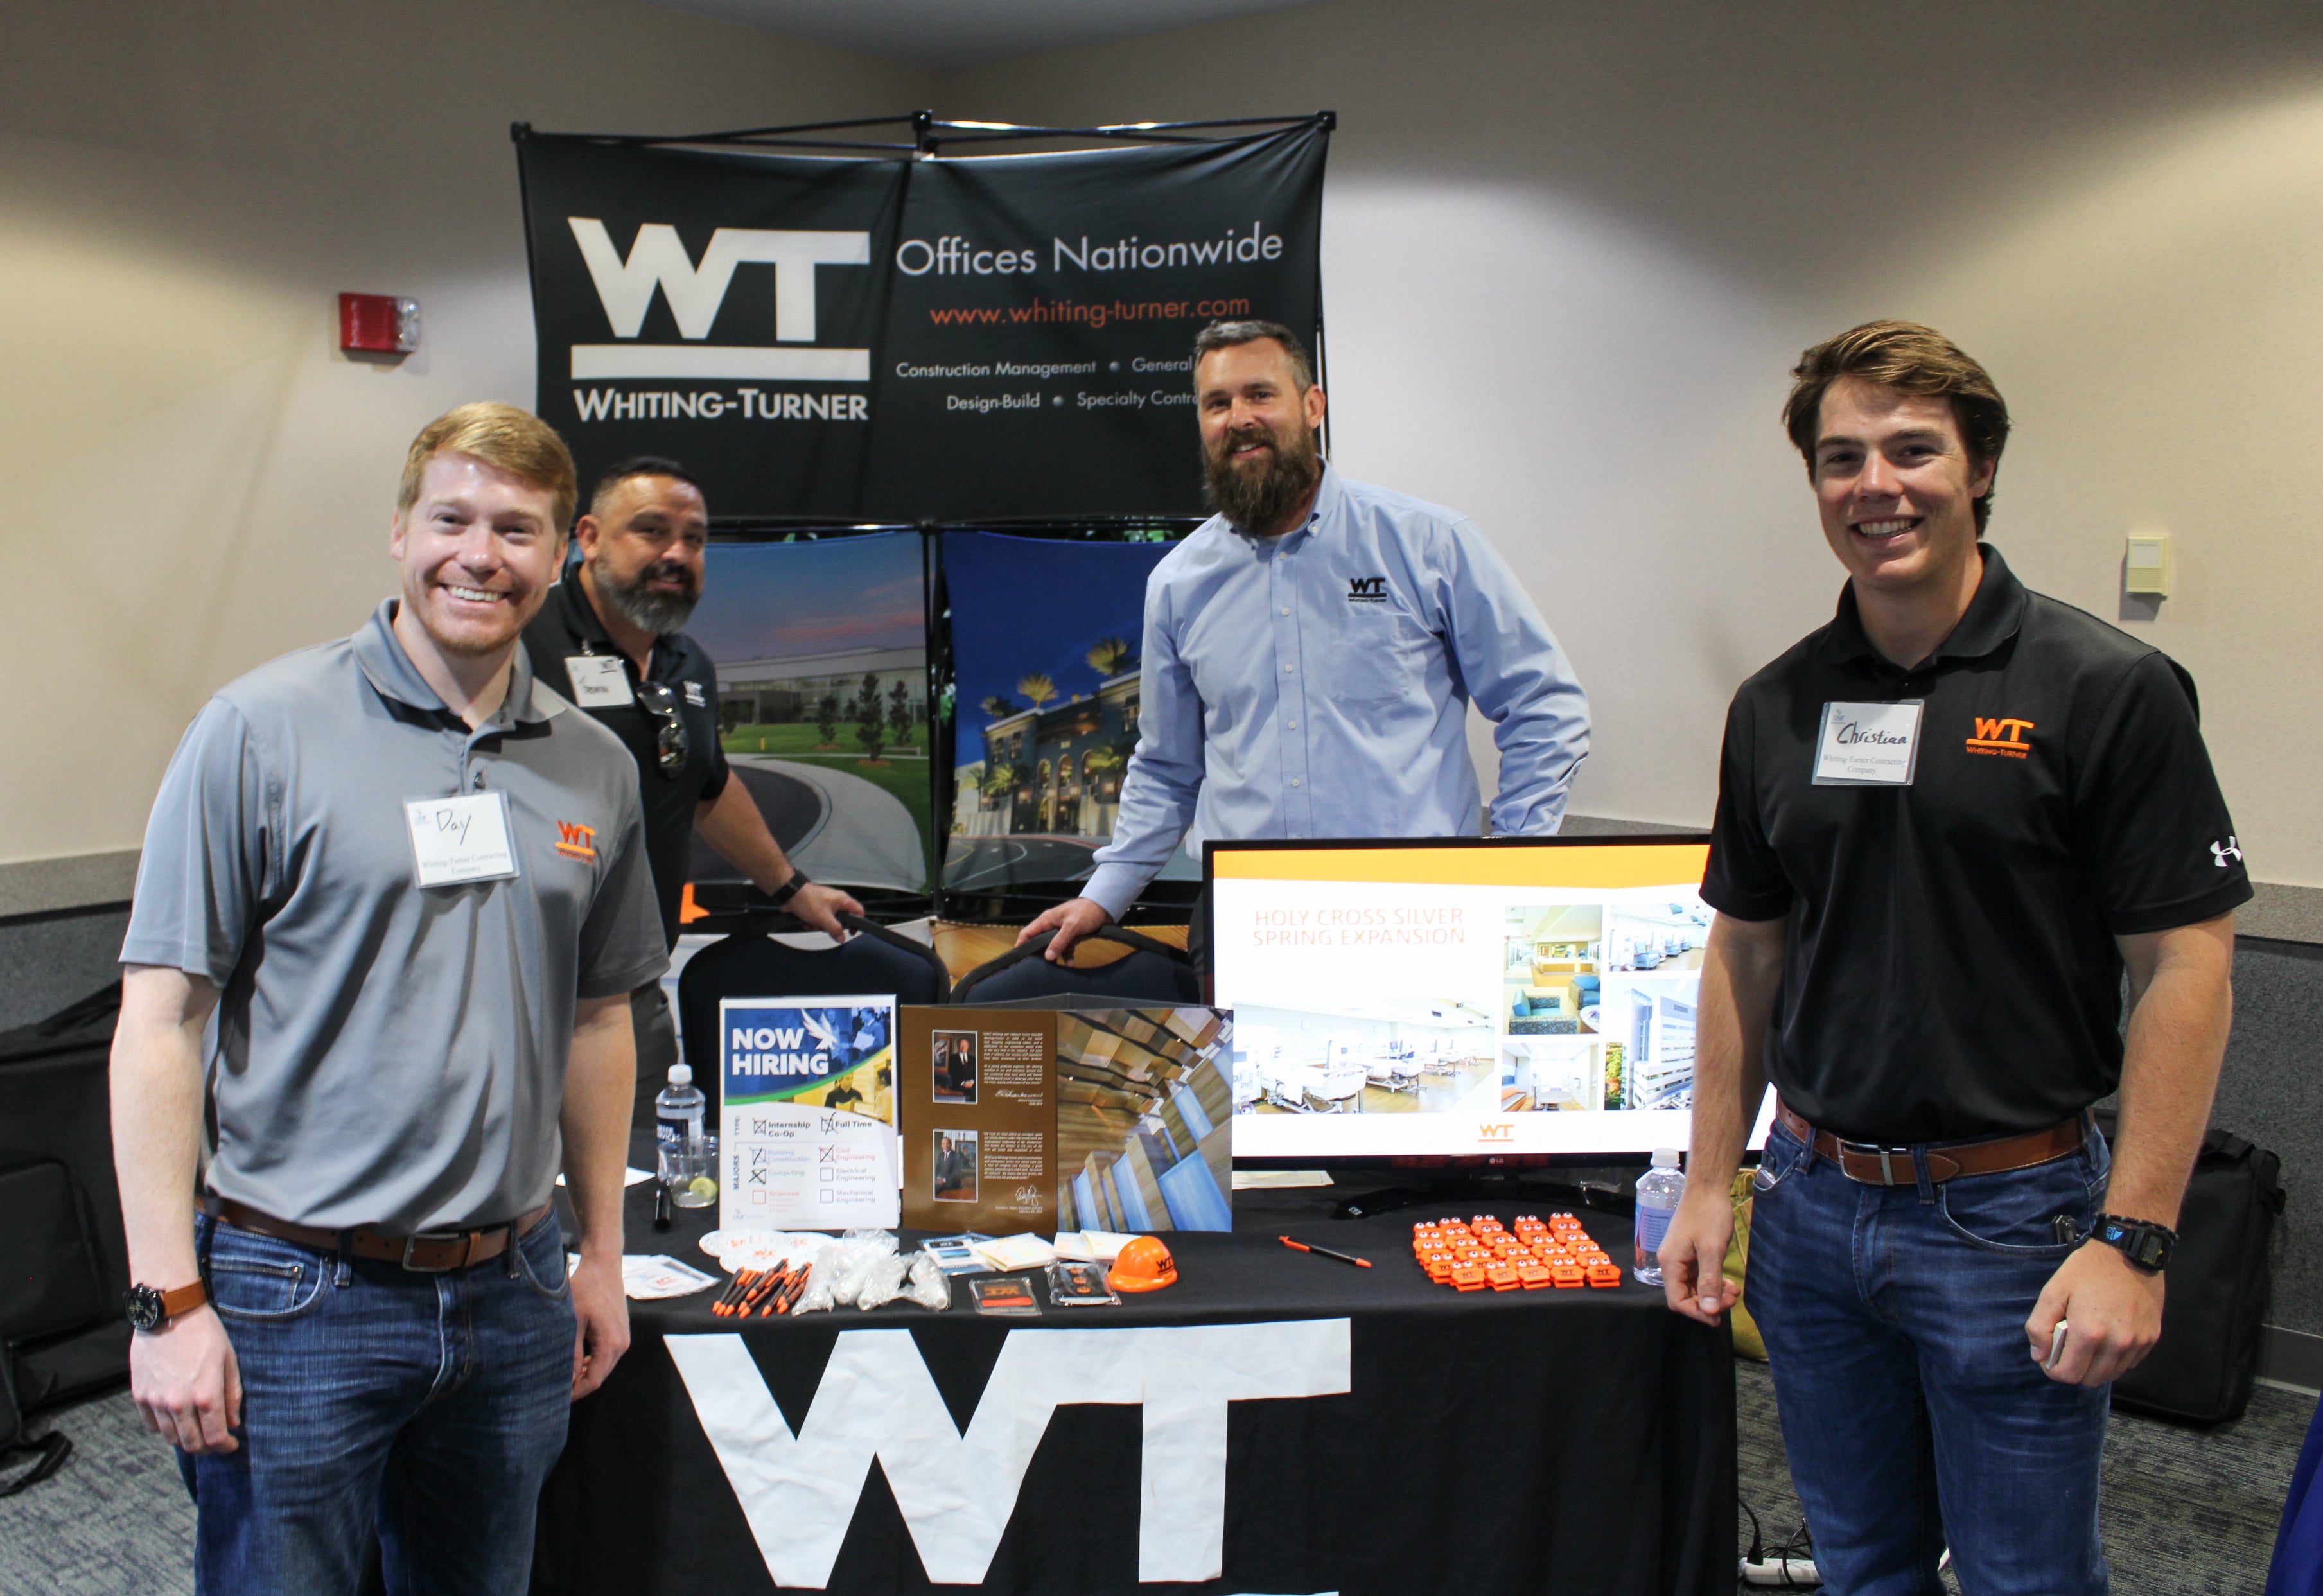 Whiting Turner company booth at career fair